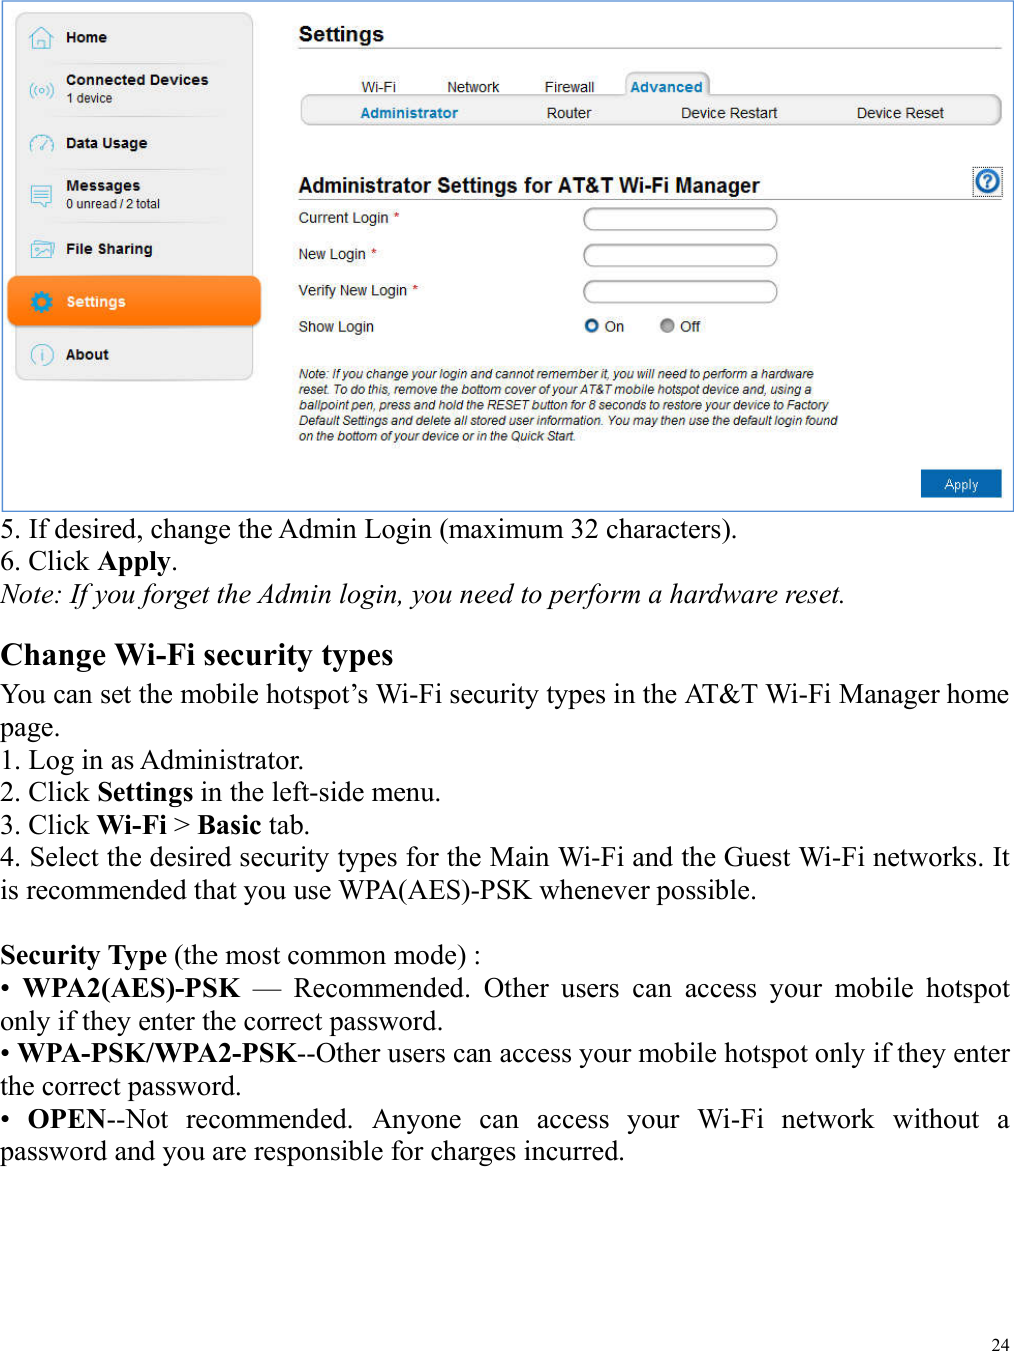 24   5. If desired, change the Admin Login (maximum 32 characters). 6. Click Apply. Note: If you forget the Admin login, you need to perform a hardware reset. Change Wi-Fi security types You can set the mobile hotspot’s Wi-Fi security types in the AT&amp;T Wi-Fi Manager home page. 1. Log in as Administrator. 2. Click Settings in the left-side menu. 3. Click Wi-Fi &gt; Basic tab. 4. Select the desired security types for the Main Wi-Fi and the Guest Wi-Fi networks. It is recommended that you use WPA(AES)-PSK whenever possible.  Security Type (the most common mode) : •  WPA2(AES)-PSK  —  Recommended.  Other  users  can  access  your  mobile  hotspot only if they enter the correct password. • WPA-PSK/WPA2-PSK--Other users can access your mobile hotspot only if they enter the correct password. •  OPEN--Not  recommended.  Anyone  can  access  your  Wi-Fi  network  without  a password and you are responsible for charges incurred. 